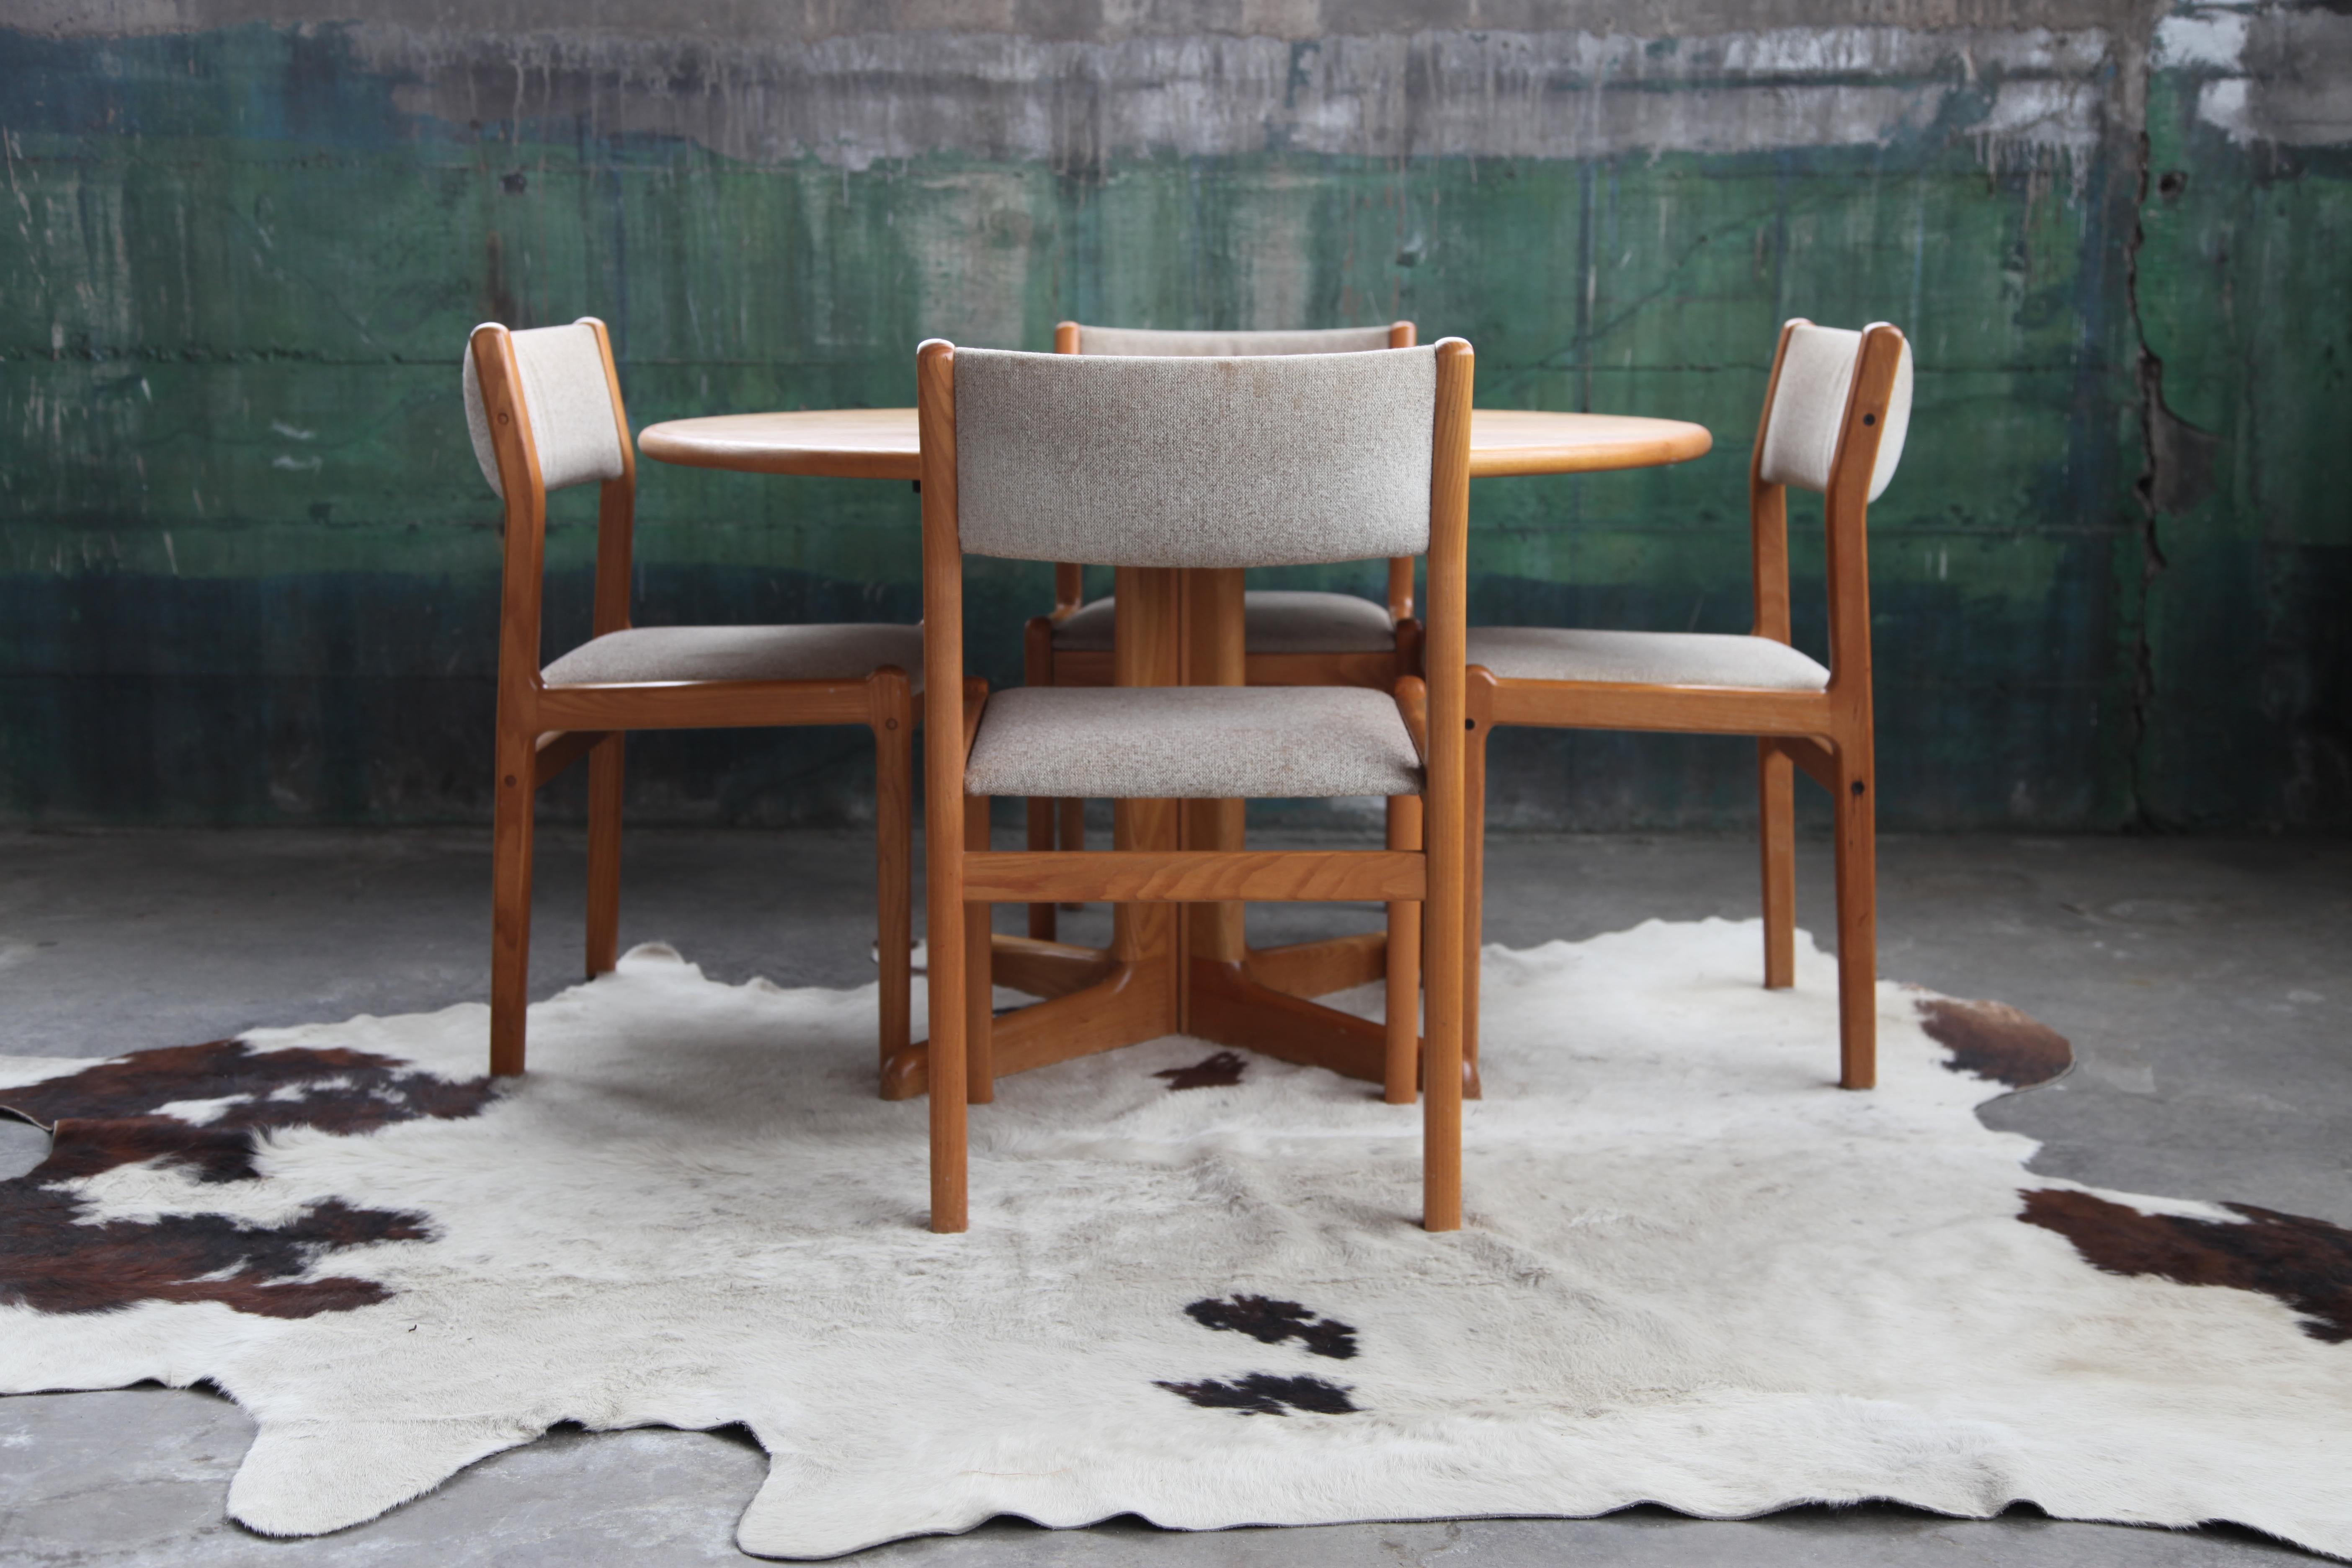 Oak MCM Round to Oval Dining Table w/ Leaves + 4 Chairs by Gudme Jl Moller, 9 Pcs For Sale